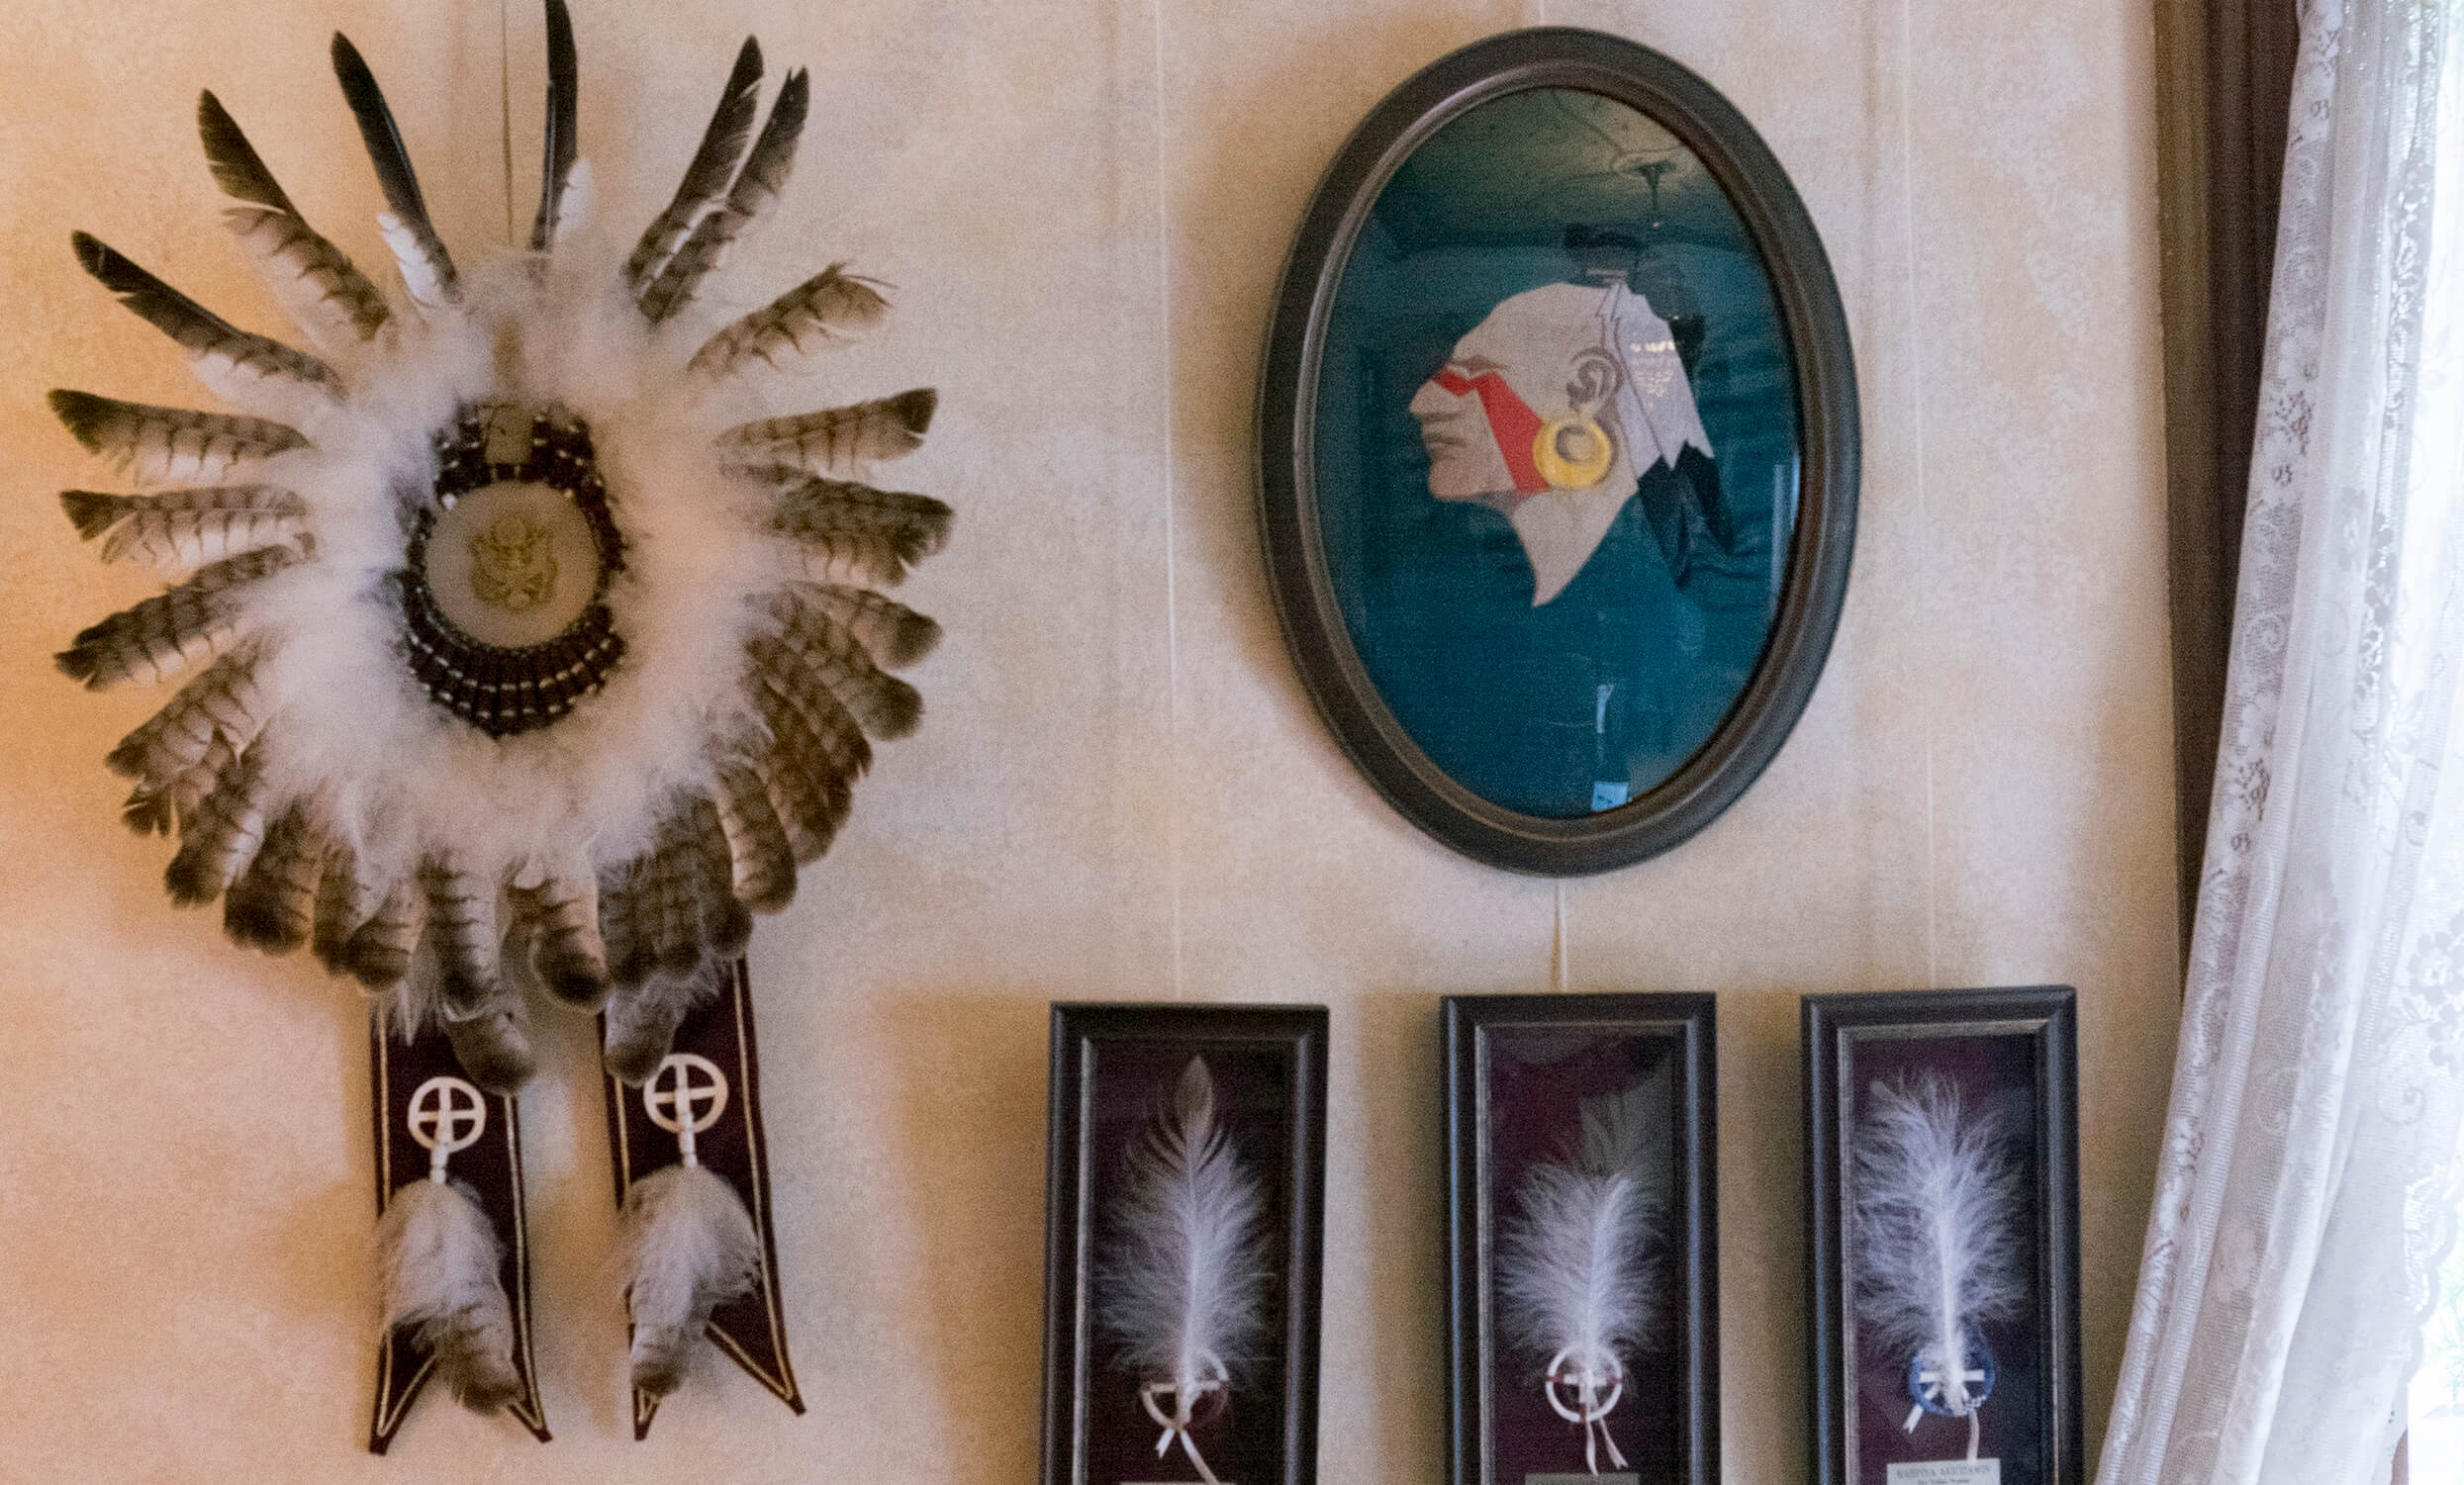 Photos and eagle feathers on a wall